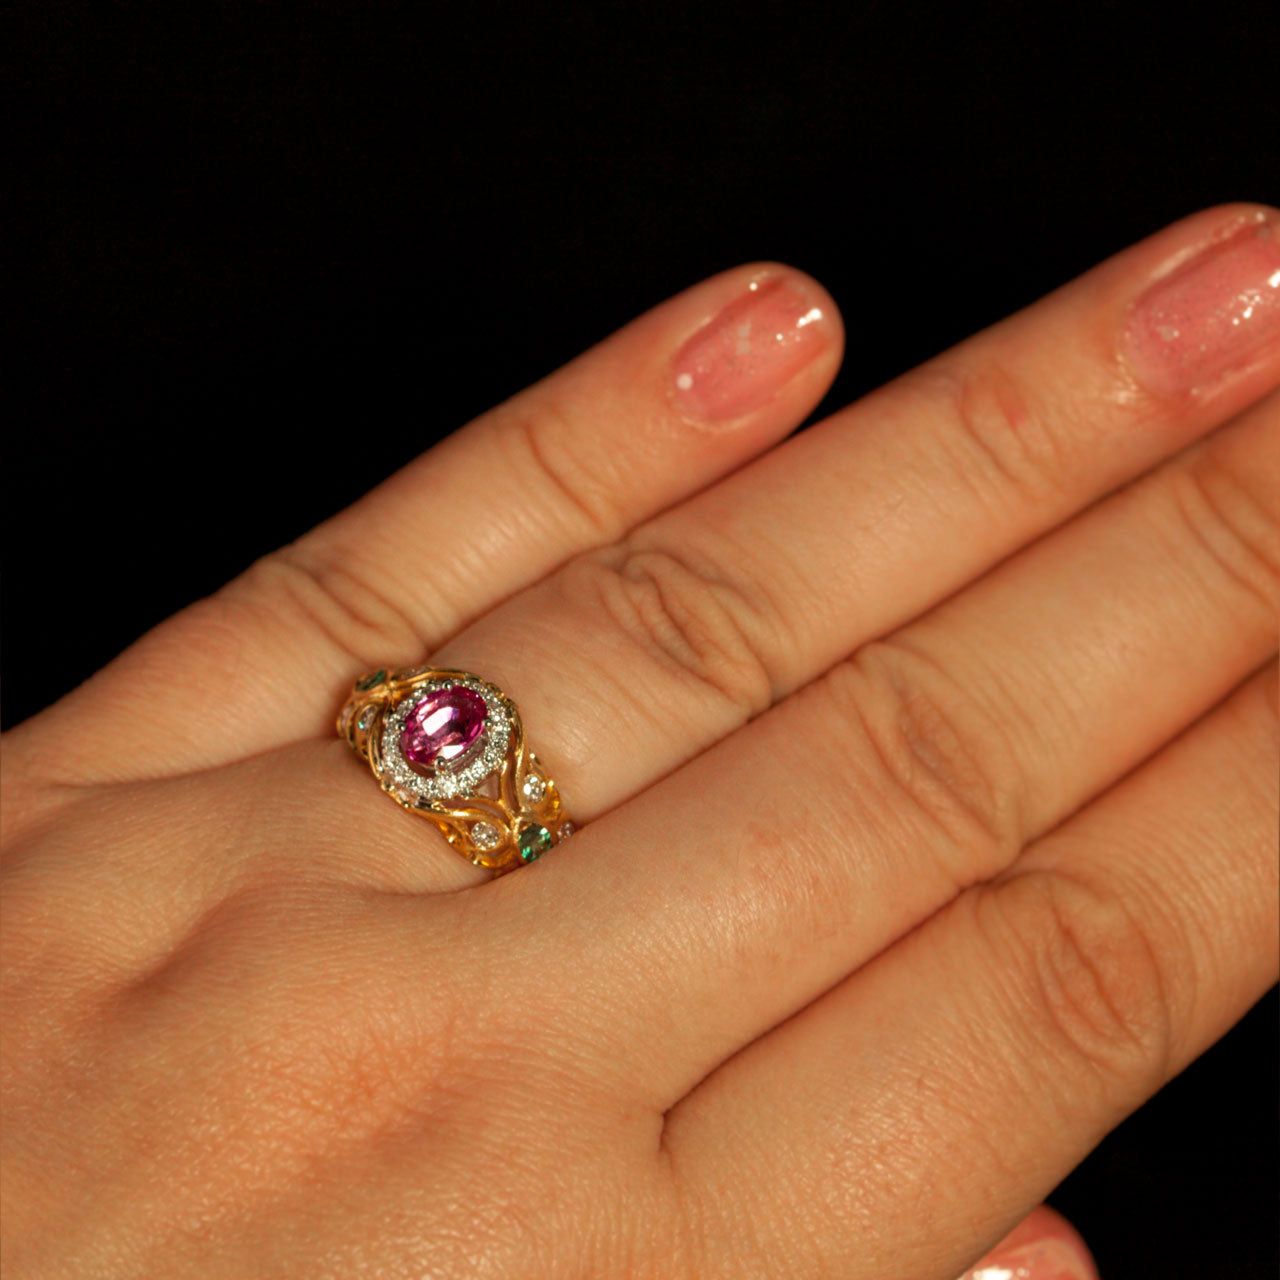 A woman's hand elegantly displaying a 0.74ct pink sapphire ring with 18k gold and alexandrite accents